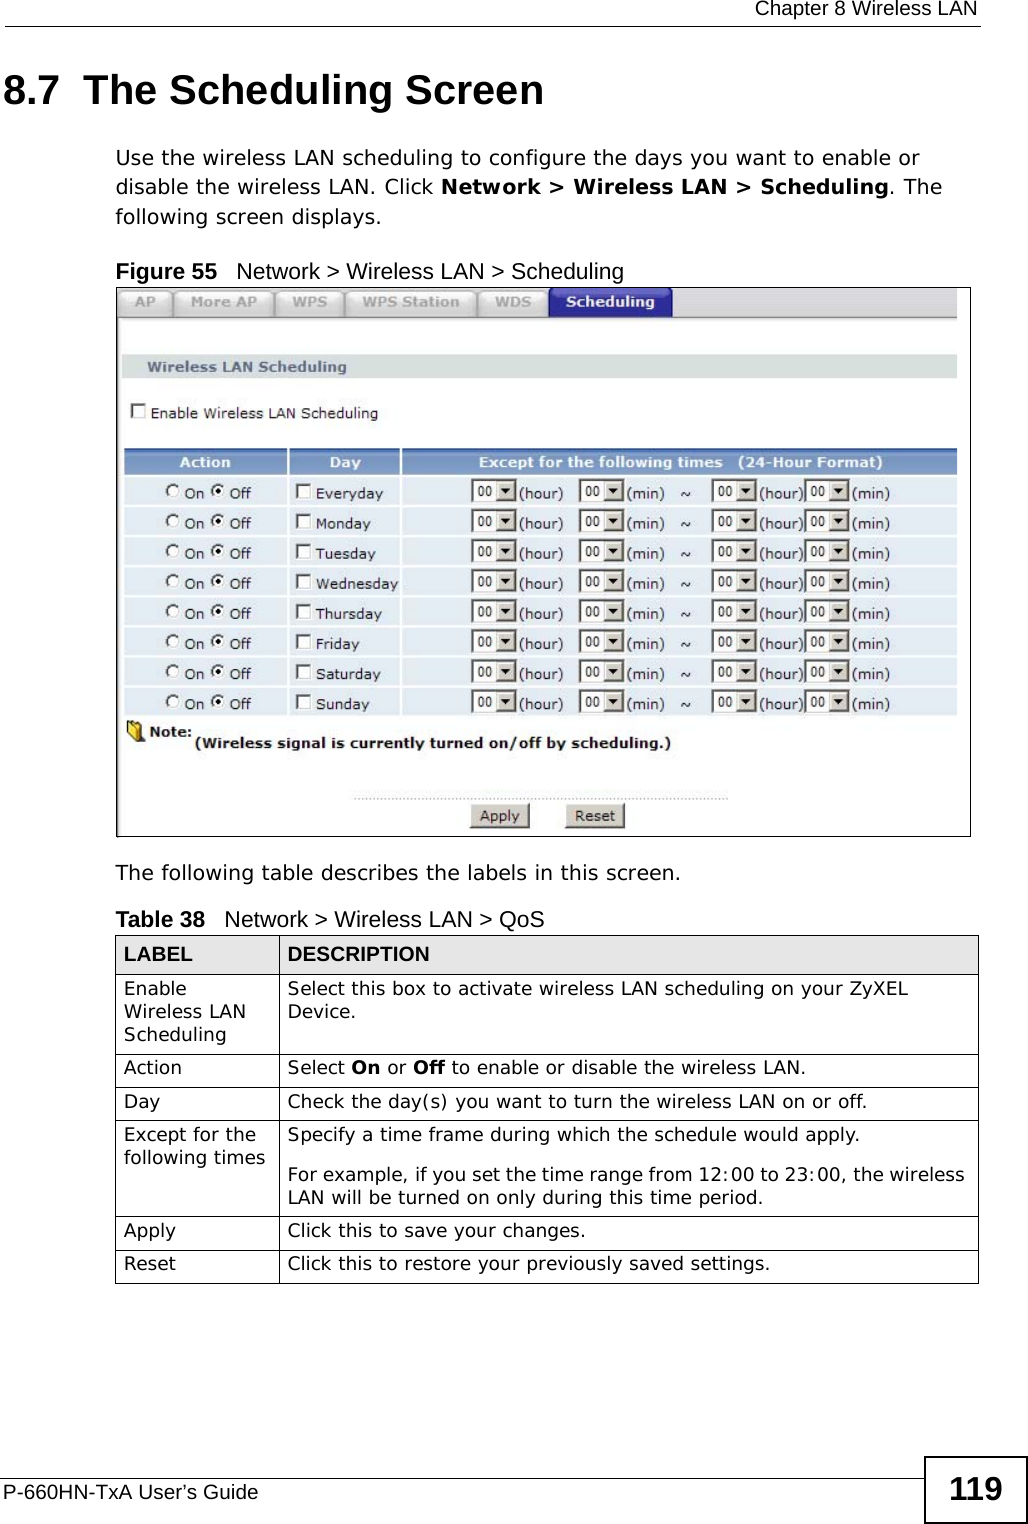  Chapter 8 Wireless LANP-660HN-TxA User’s Guide 1198.7  The Scheduling ScreenUse the wireless LAN scheduling to configure the days you want to enable or disable the wireless LAN. Click Network &gt; Wireless LAN &gt; Scheduling. The following screen displays.Figure 55   Network &gt; Wireless LAN &gt; SchedulingThe following table describes the labels in this screen.Table 38   Network &gt; Wireless LAN &gt; QoSLABEL DESCRIPTIONEnable Wireless LAN SchedulingSelect this box to activate wireless LAN scheduling on your ZyXEL Device.Action Select On or Off to enable or disable the wireless LAN.Day Check the day(s) you want to turn the wireless LAN on or off.Except for the following times Specify a time frame during which the schedule would apply.For example, if you set the time range from 12:00 to 23:00, the wireless LAN will be turned on only during this time period.Apply Click this to save your changes.Reset Click this to restore your previously saved settings.